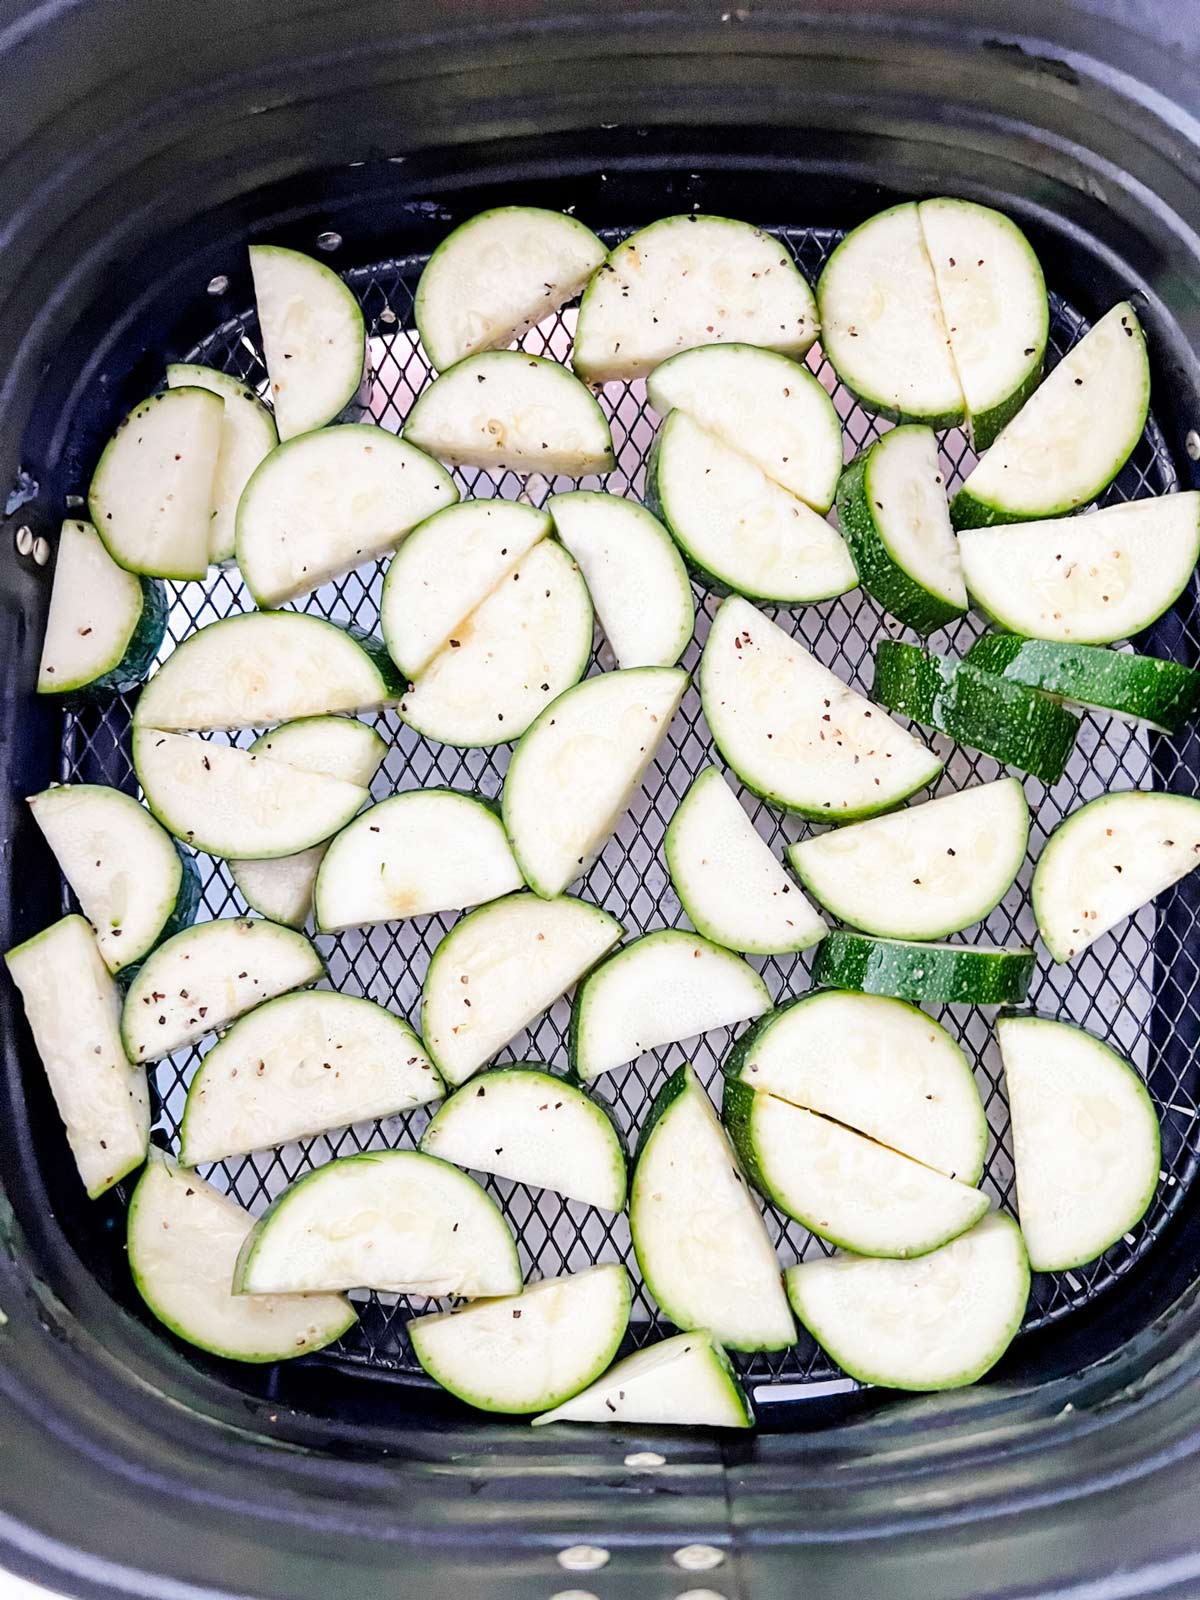 Sliced zucchini in the basket of an air fryer.